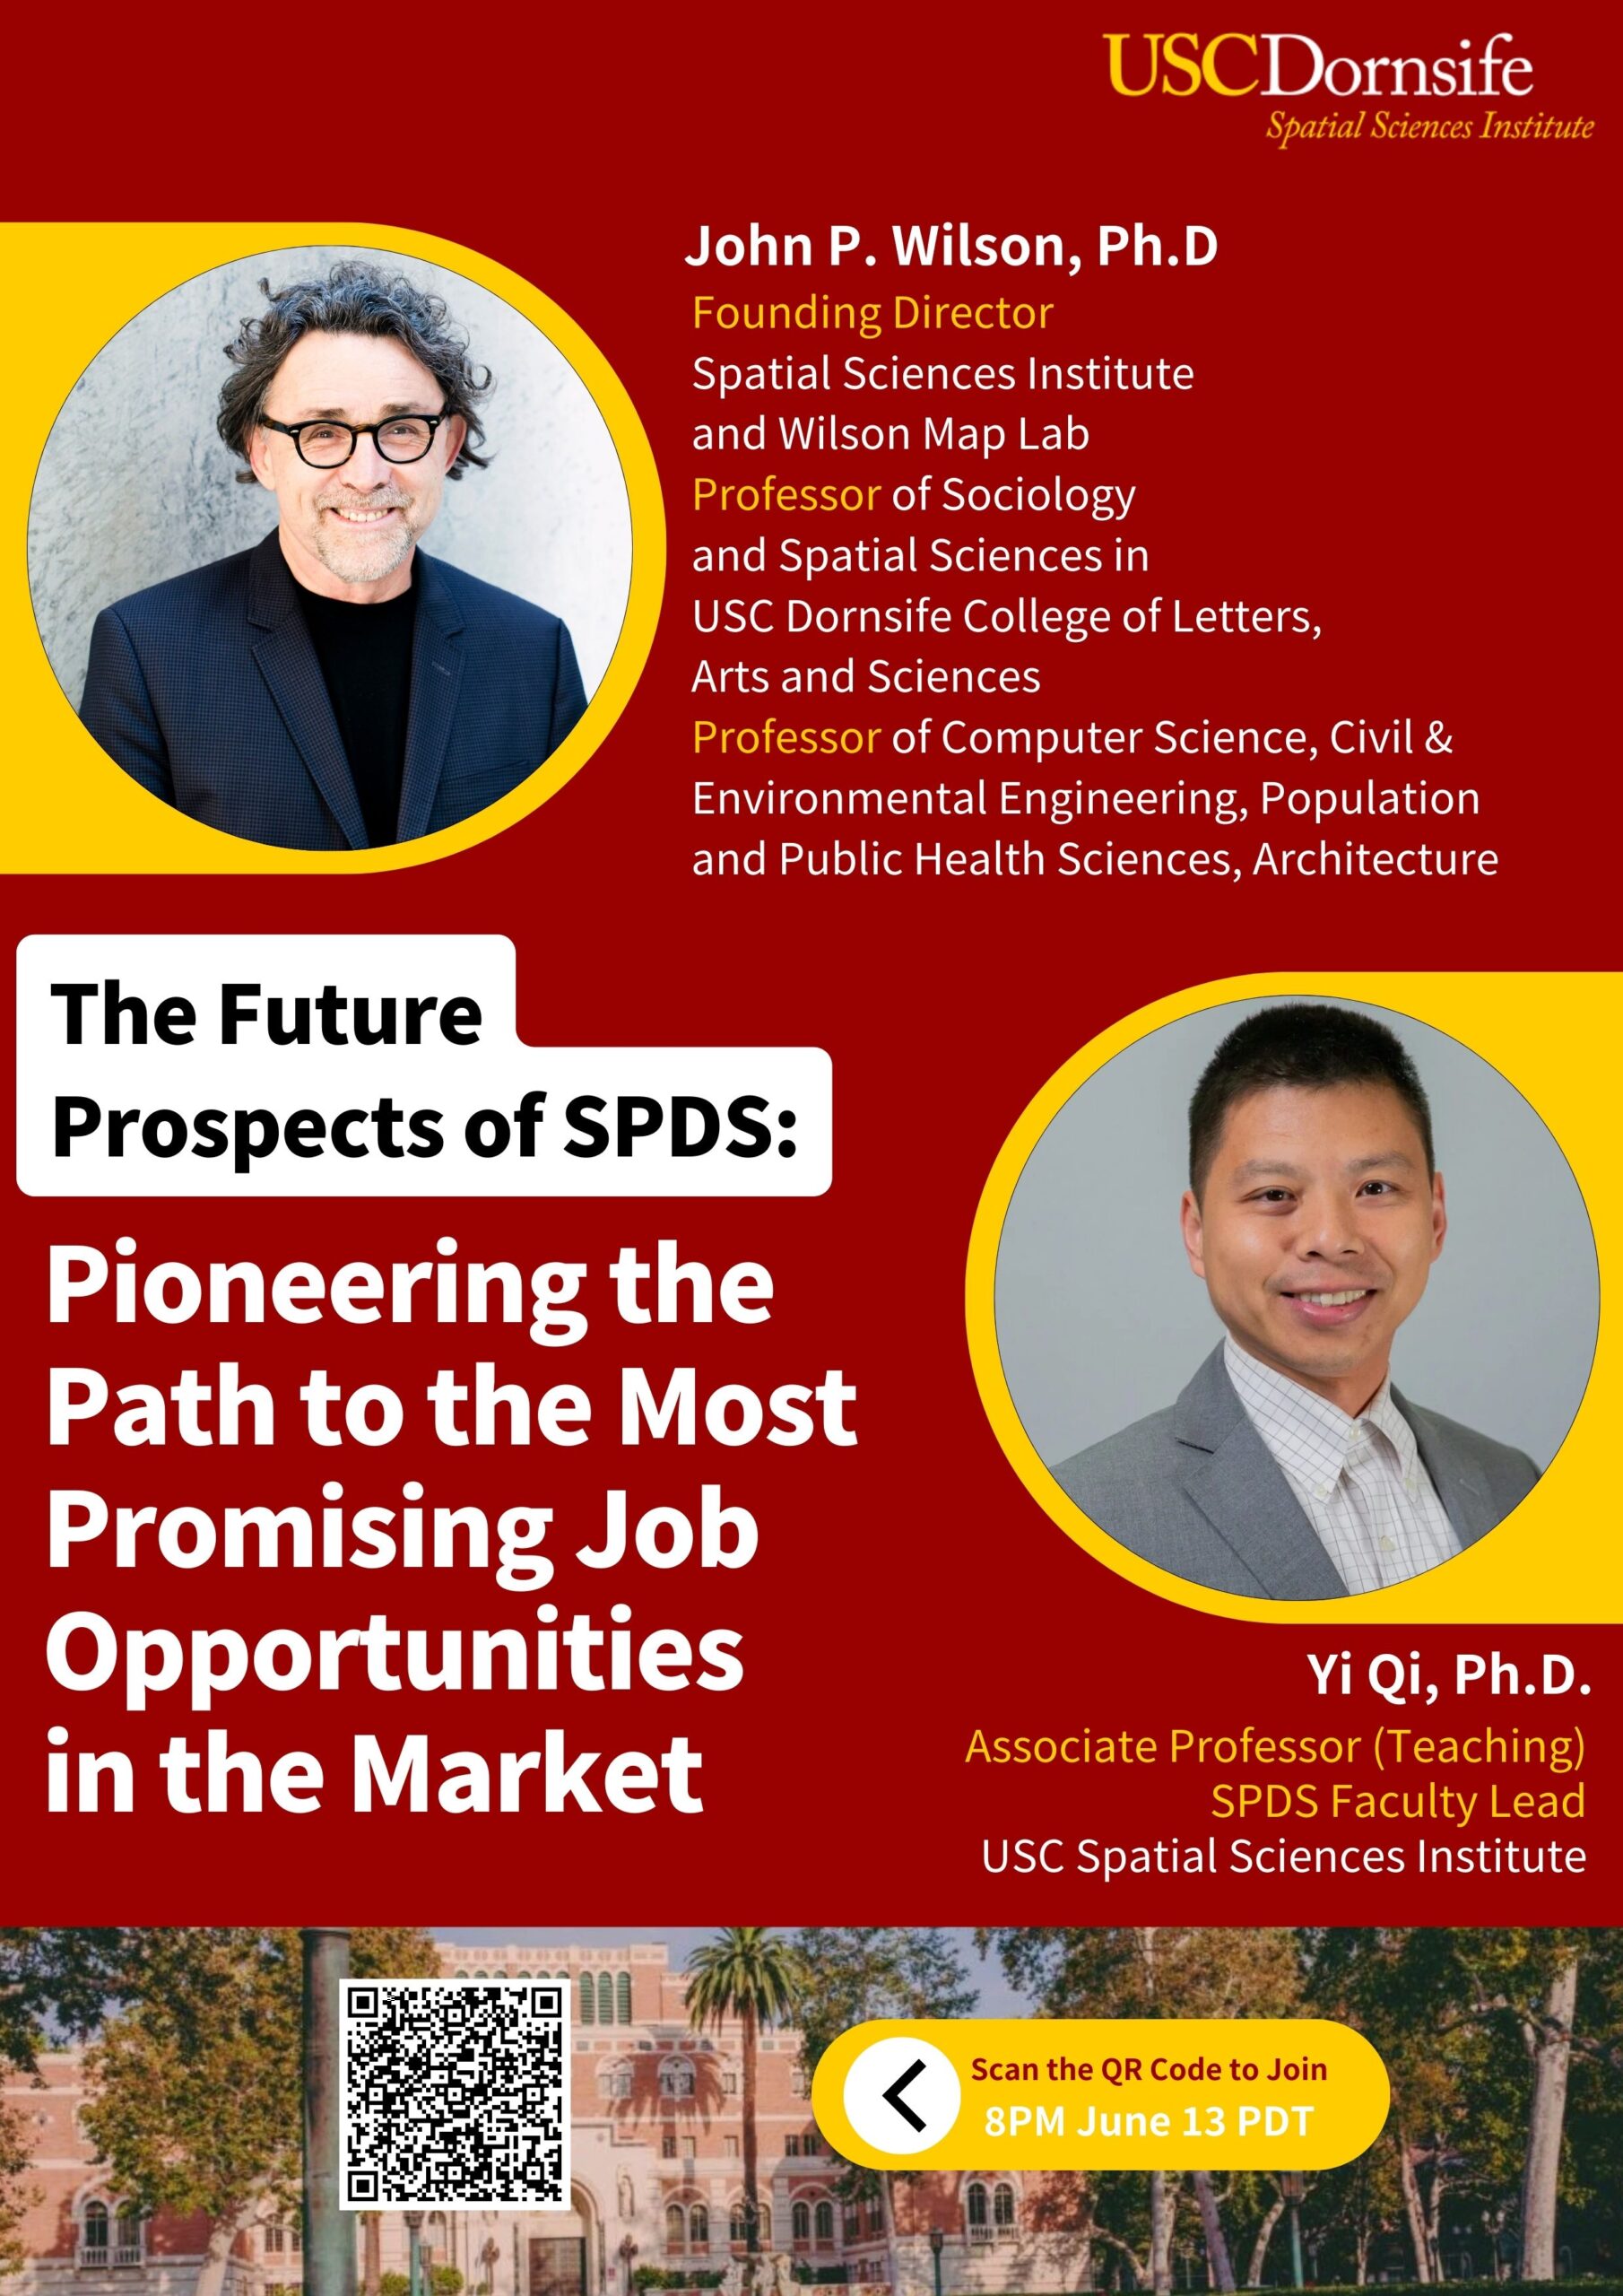 The Future Prospects of SPDS: Pioneering the Path to the Most Promising Job Opportunities in the Market